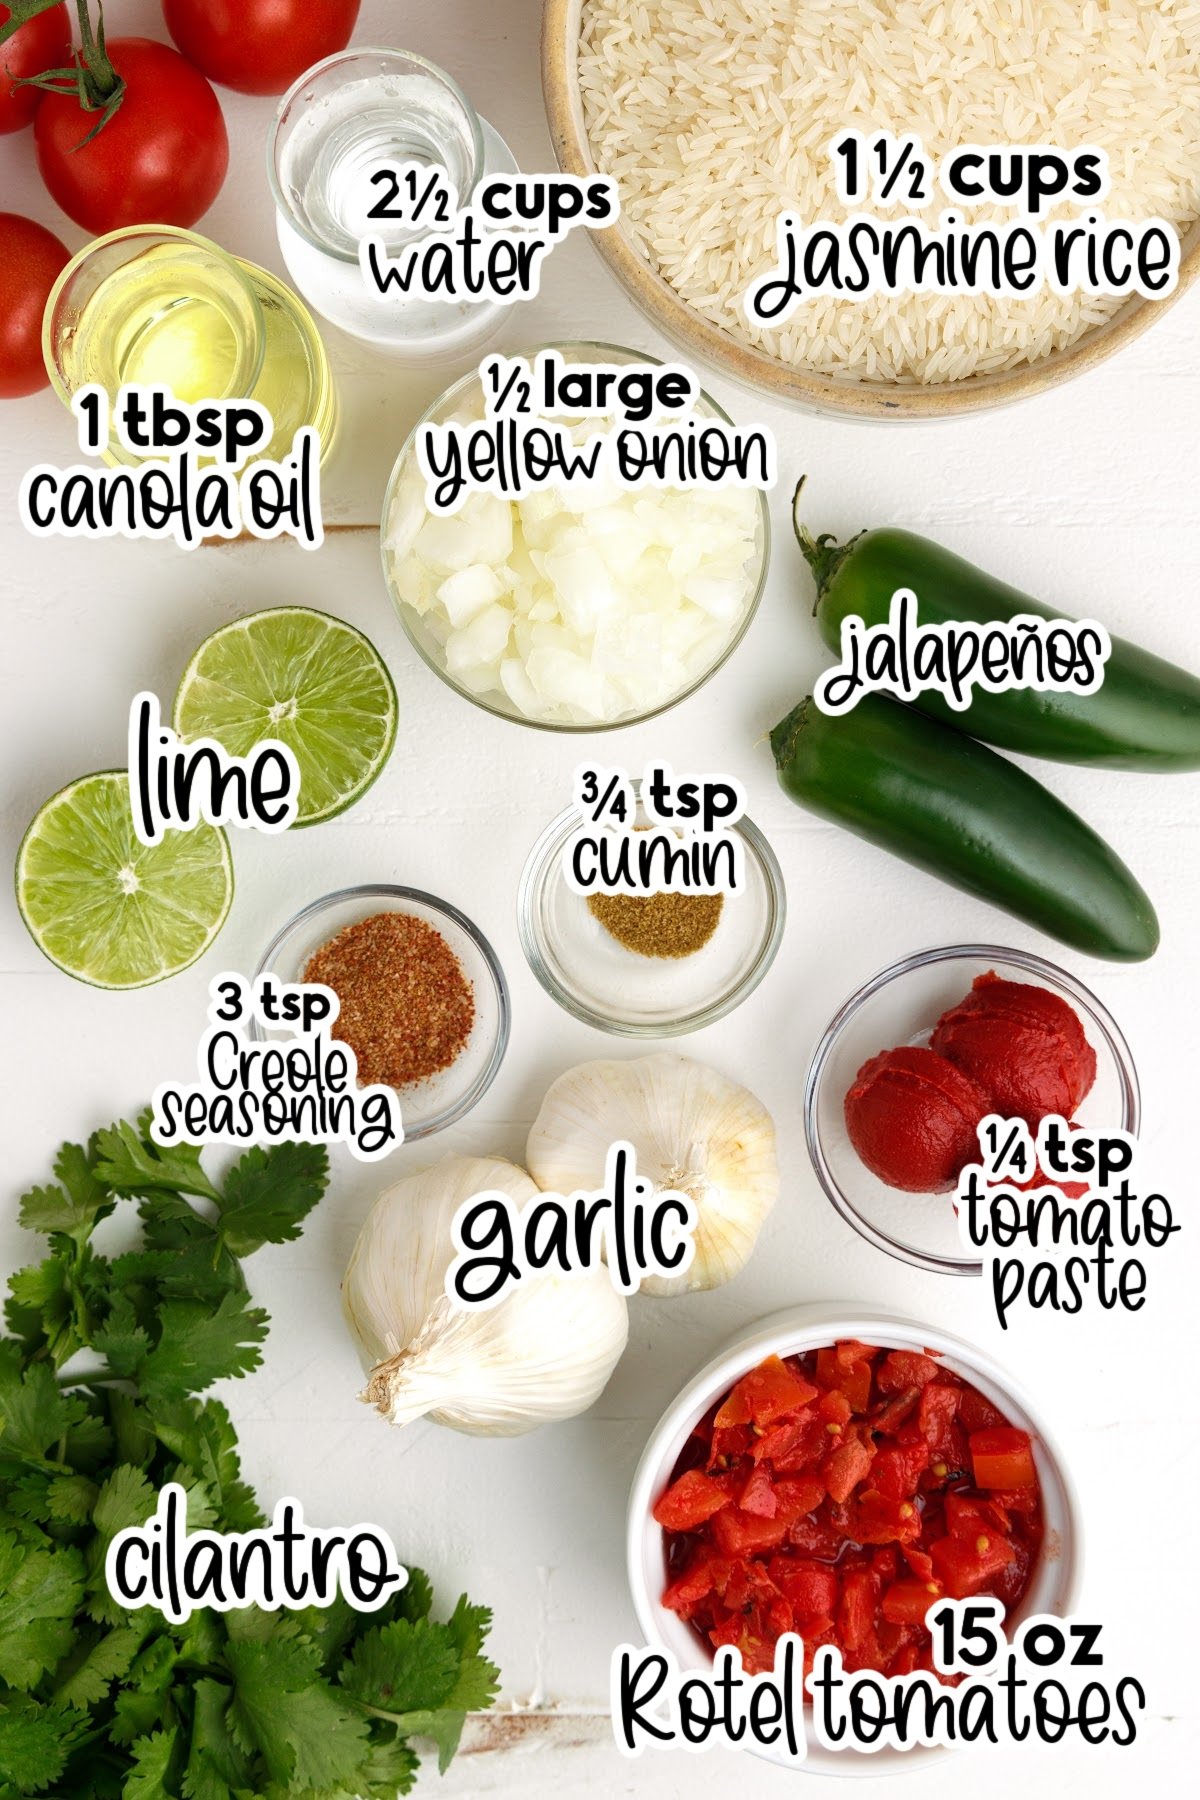 All ingredients layed out in small bowls or on the counter to be used in the recipe.